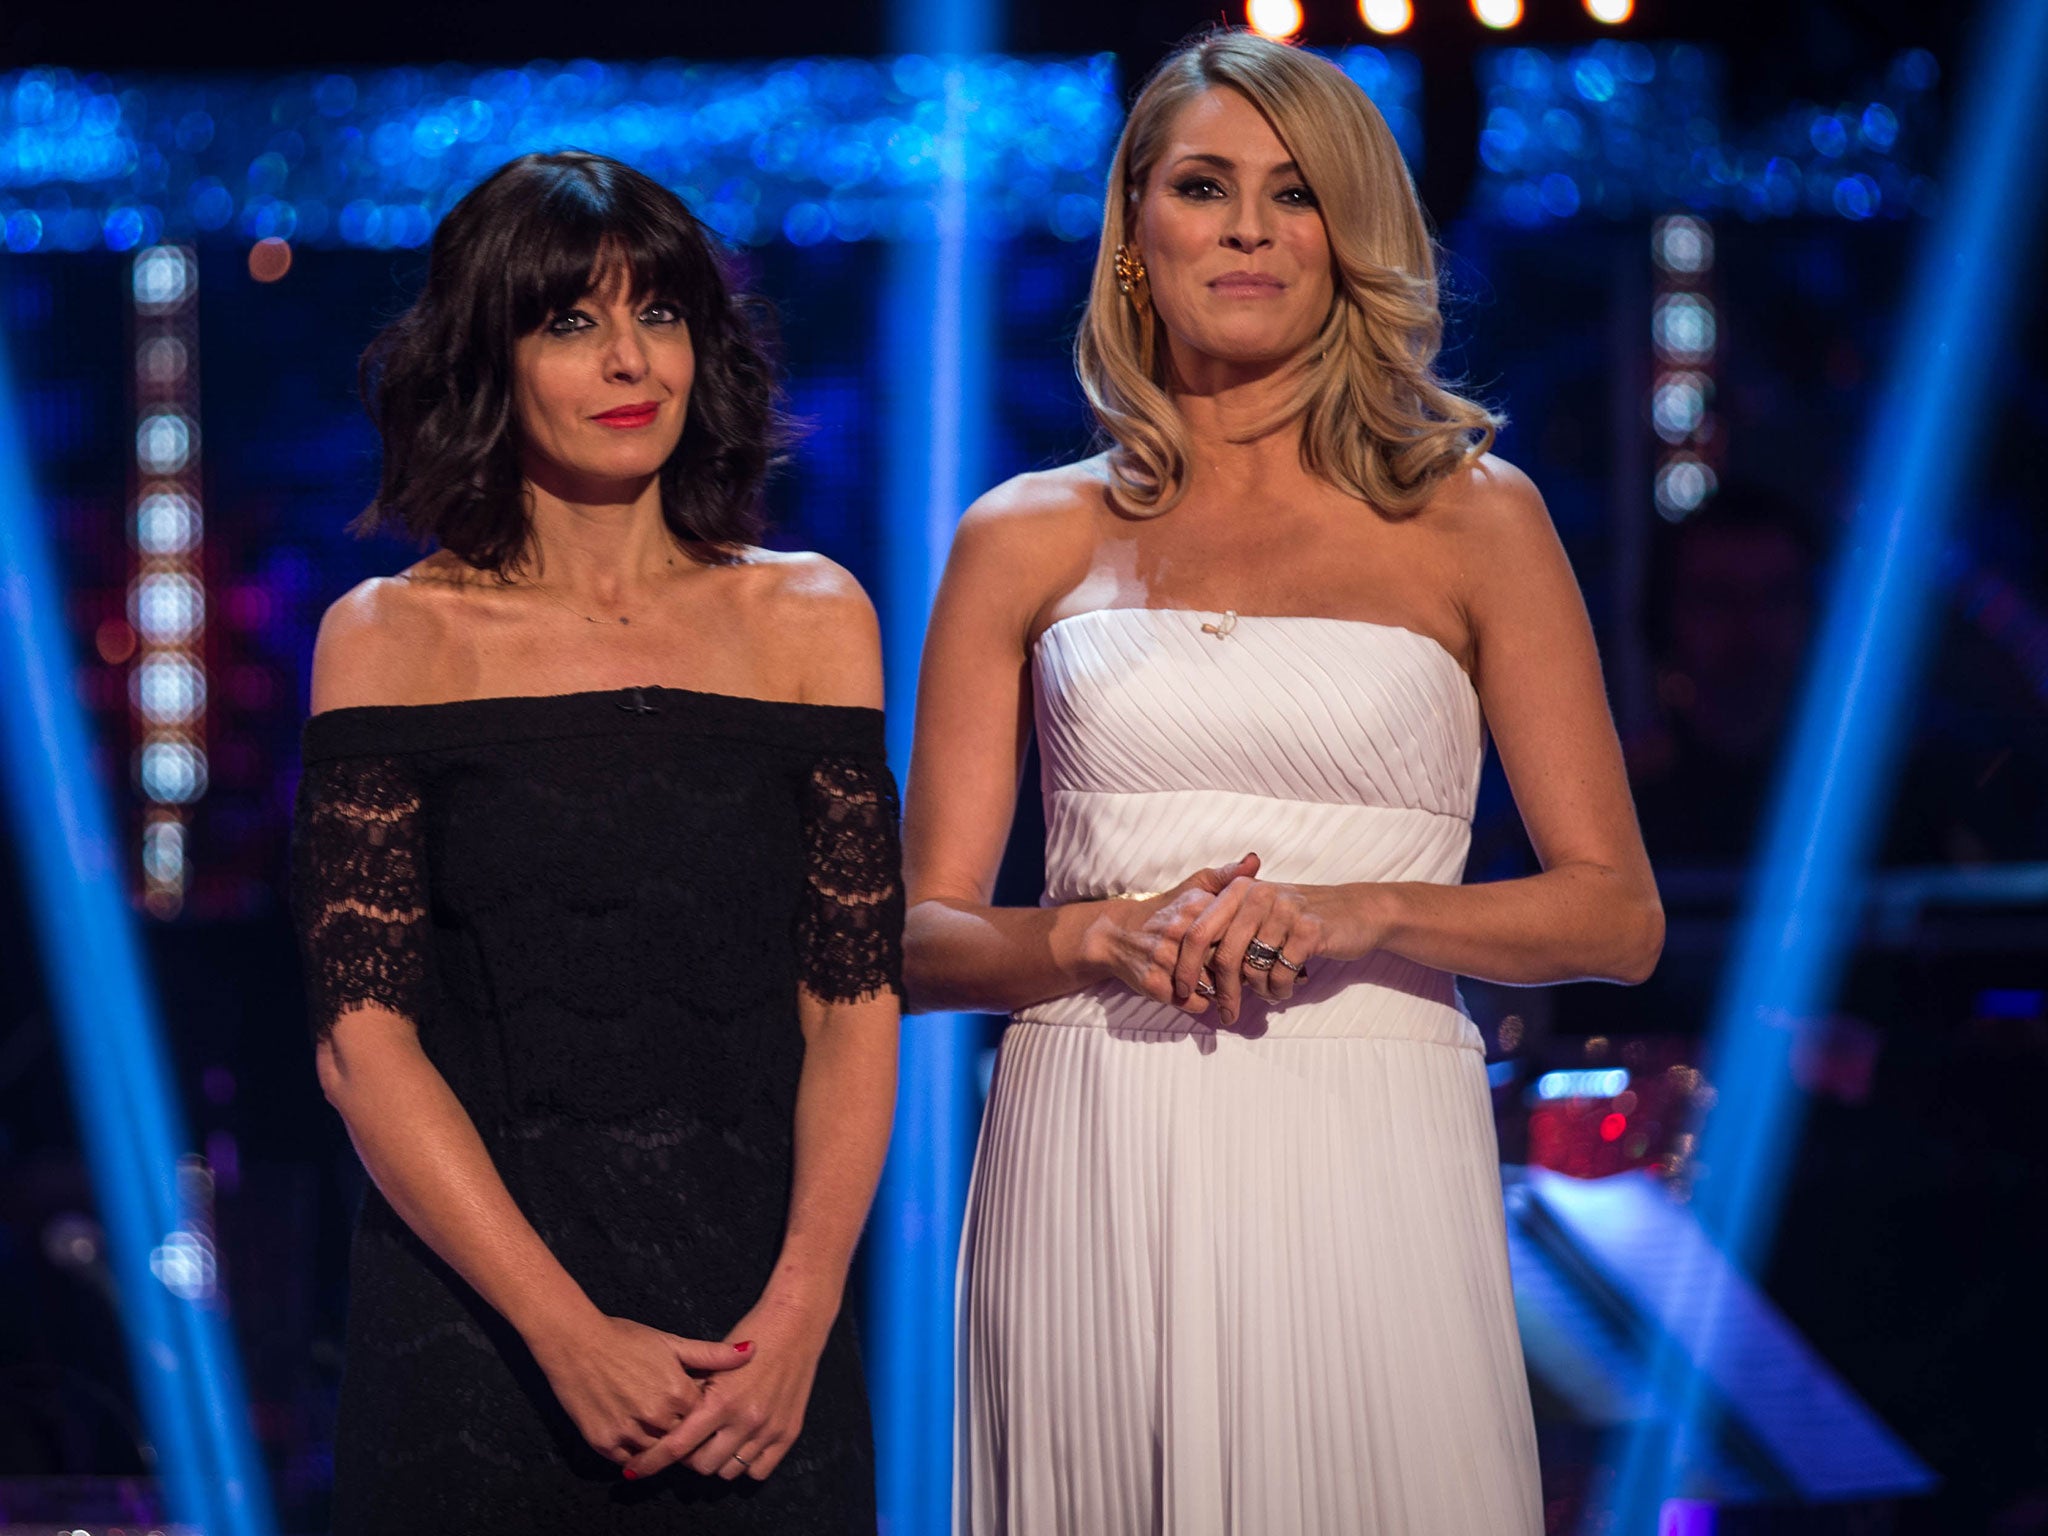 Claudia Winkleman and co-host Tess Daly at the Strictly Come Dancing final